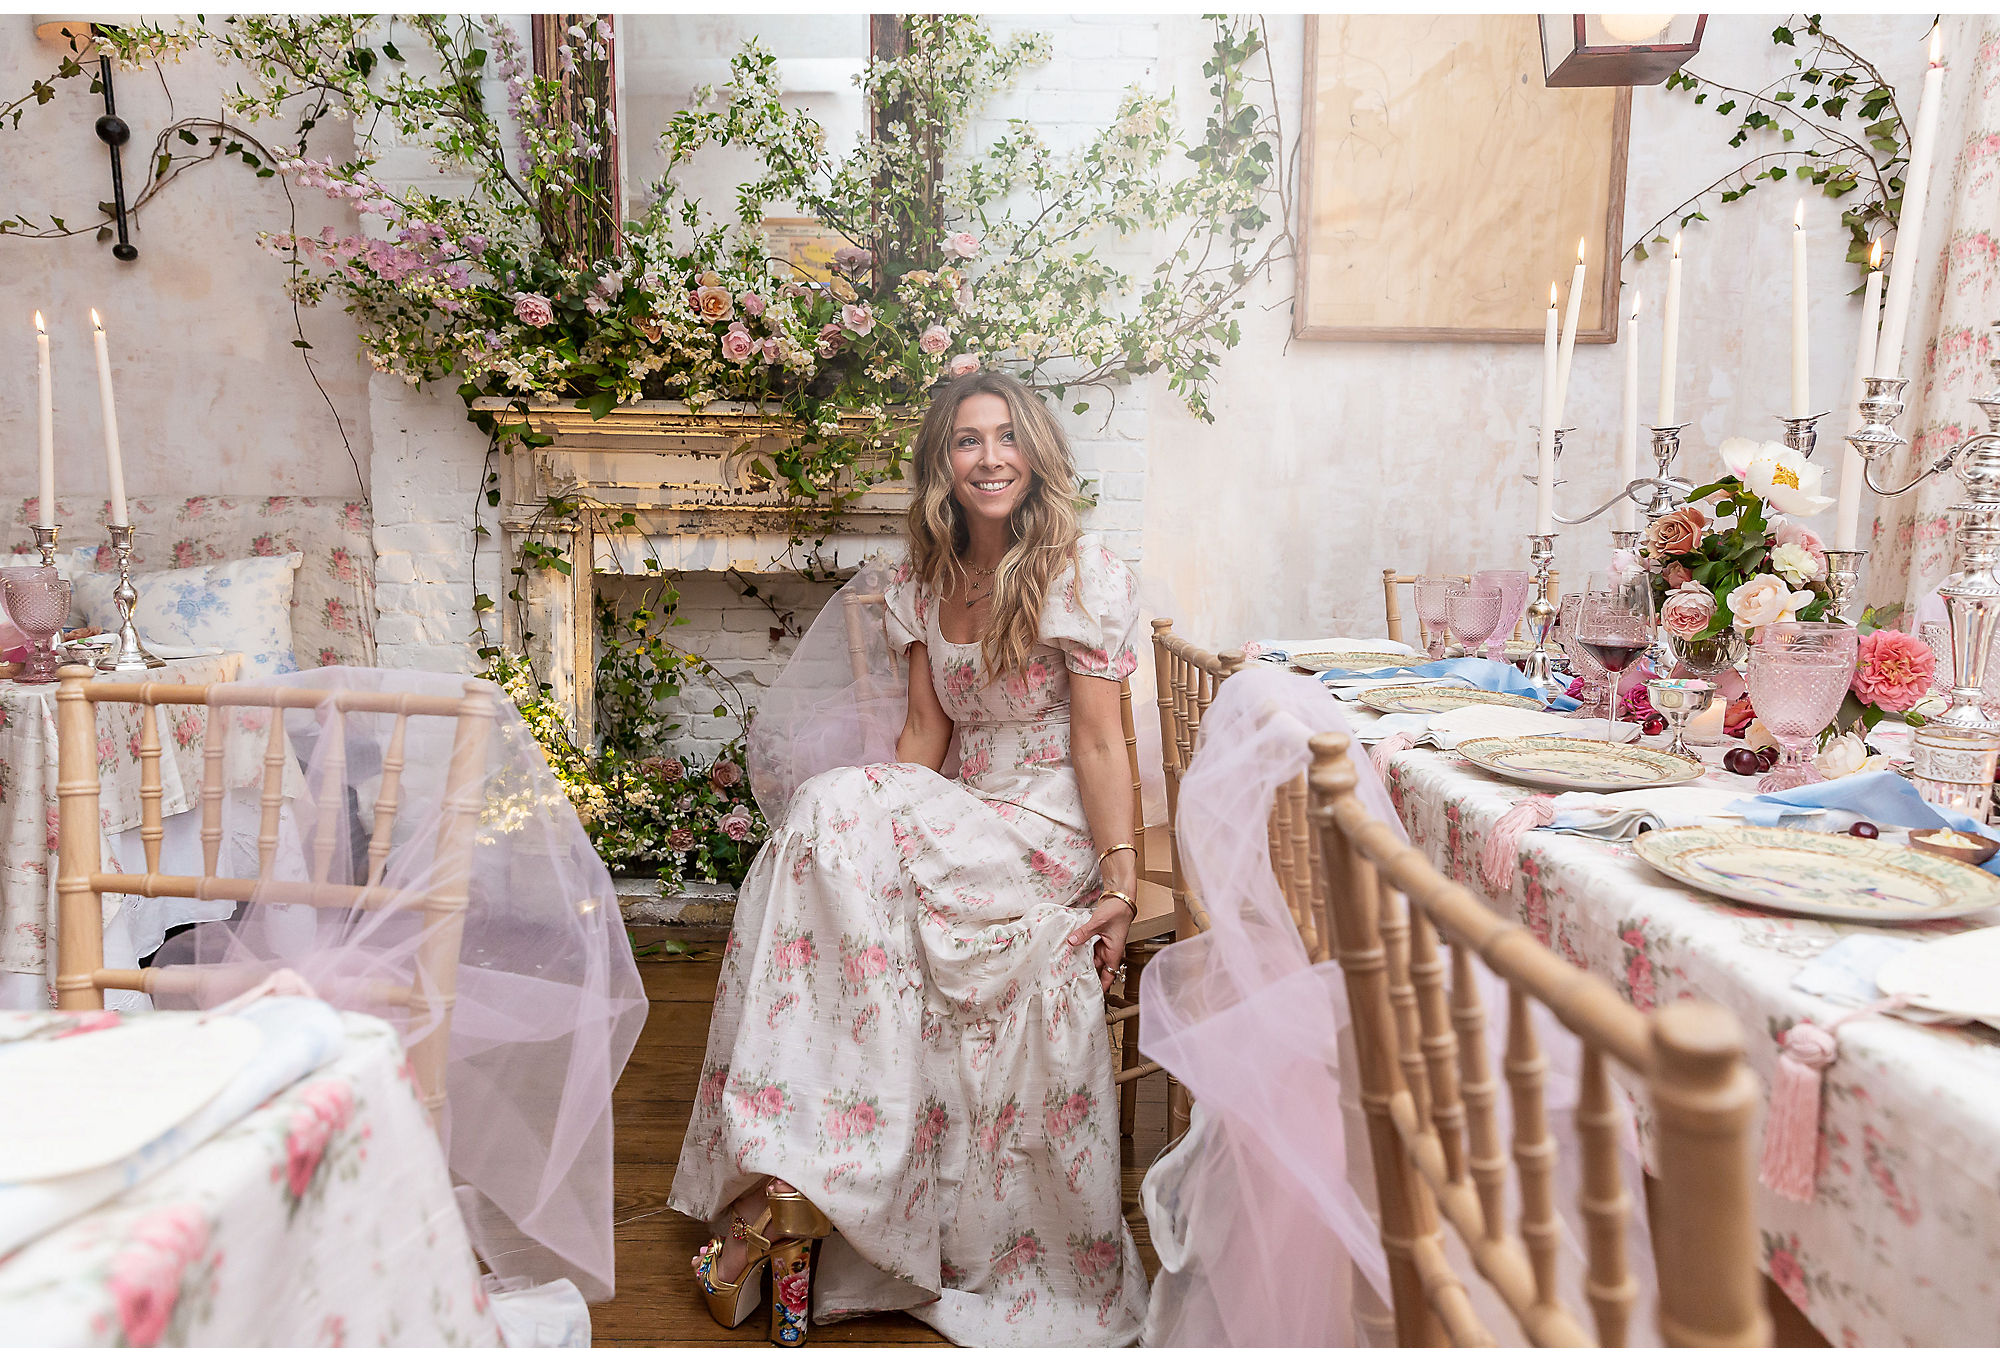 Rebecca’s world is filled with floral prints and romantic overtones.
